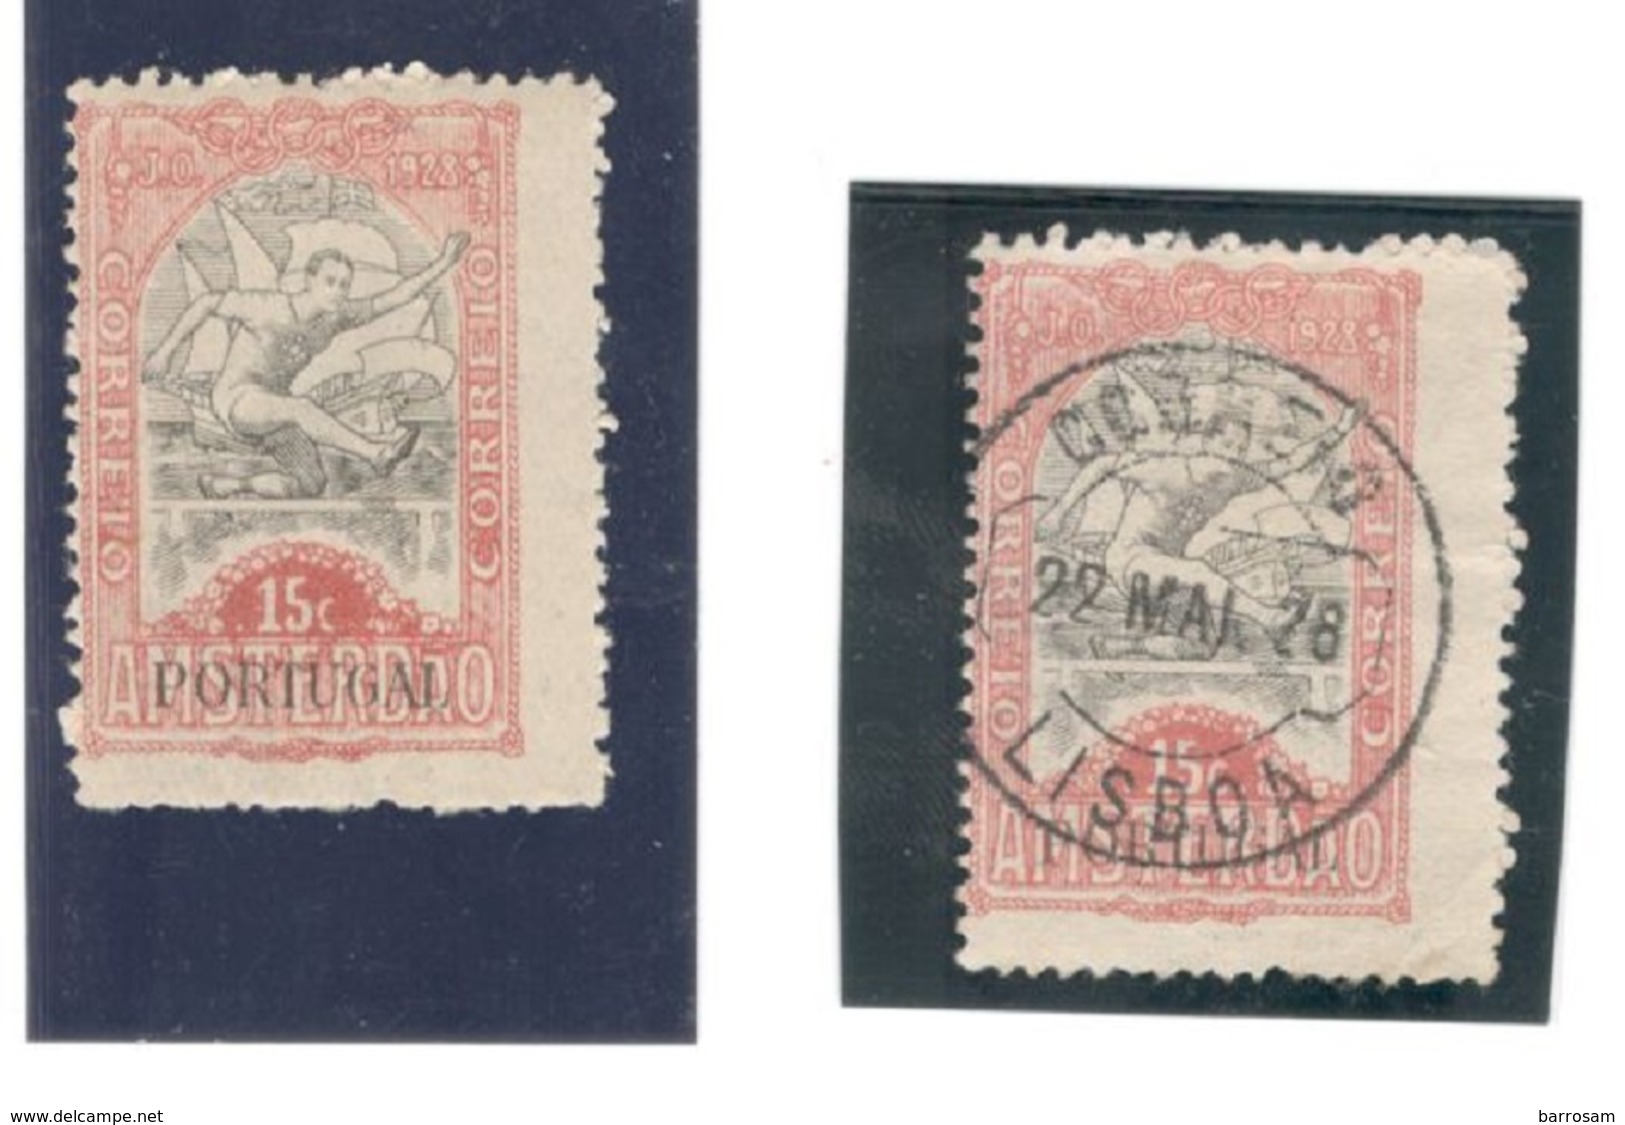 PORTUGAL1928:OLYMPICS Scott RA14mlh* And Used - Sommer 1928: Amsterdam